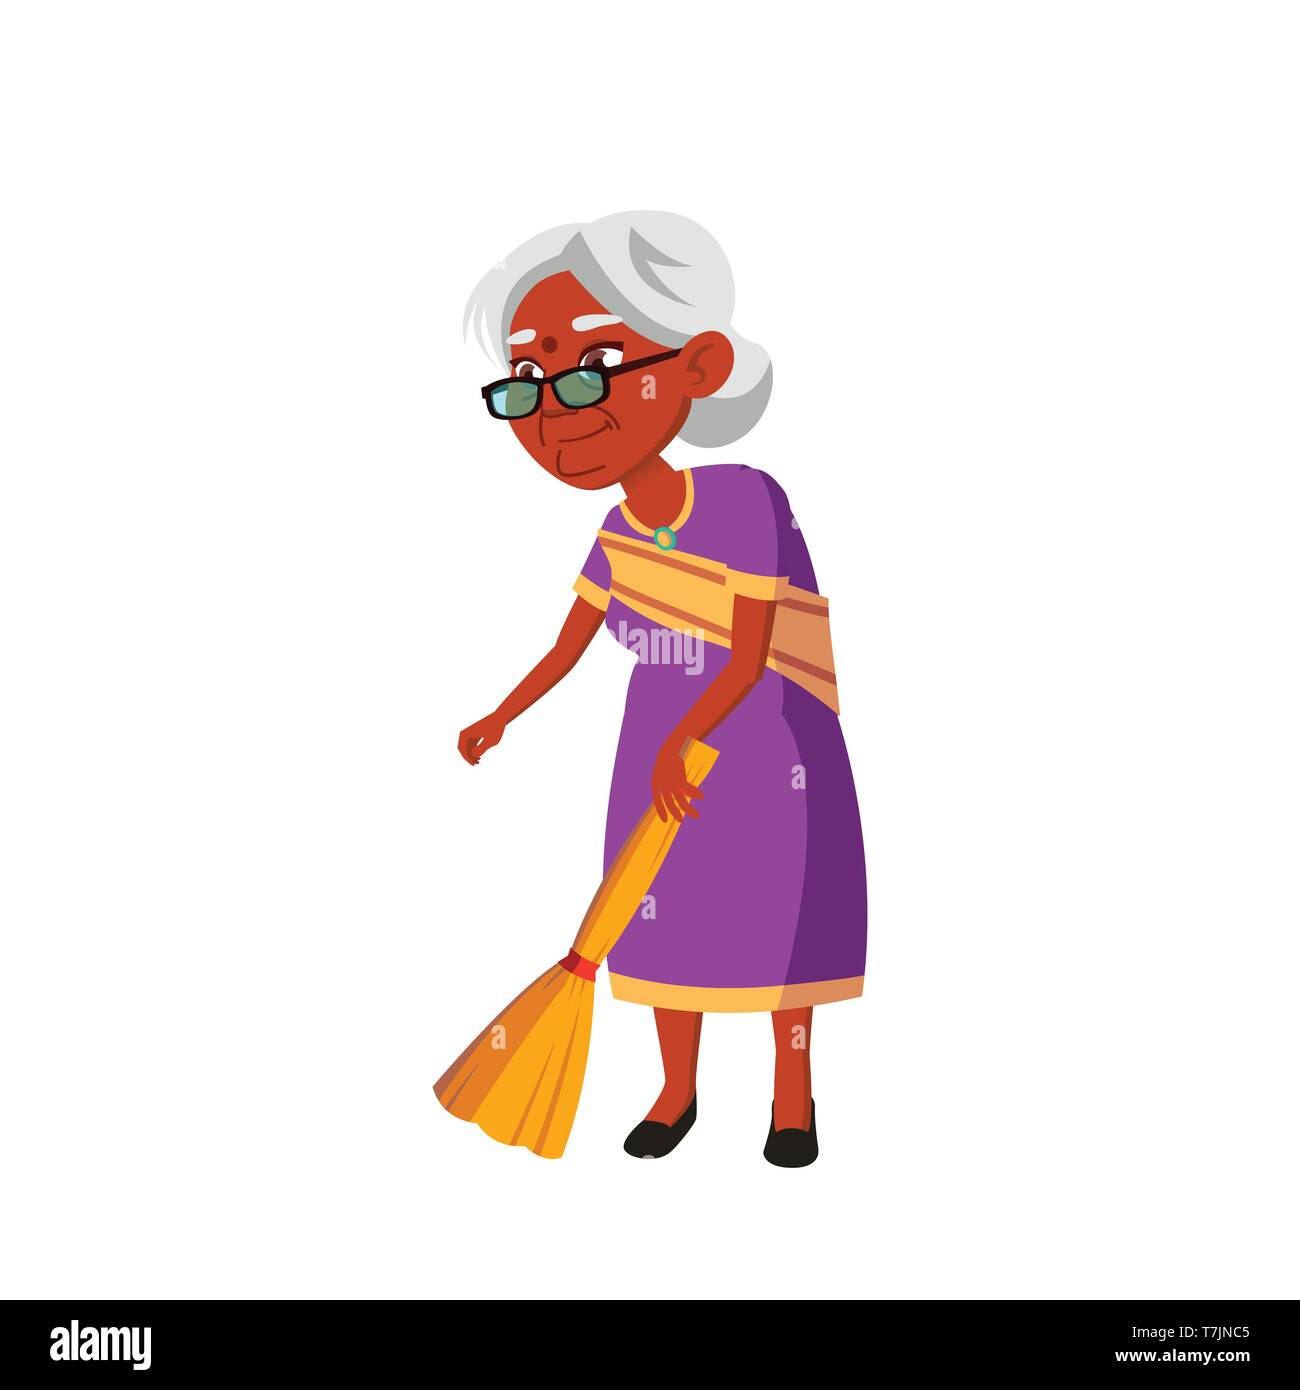 Images Of Old People Cartoon